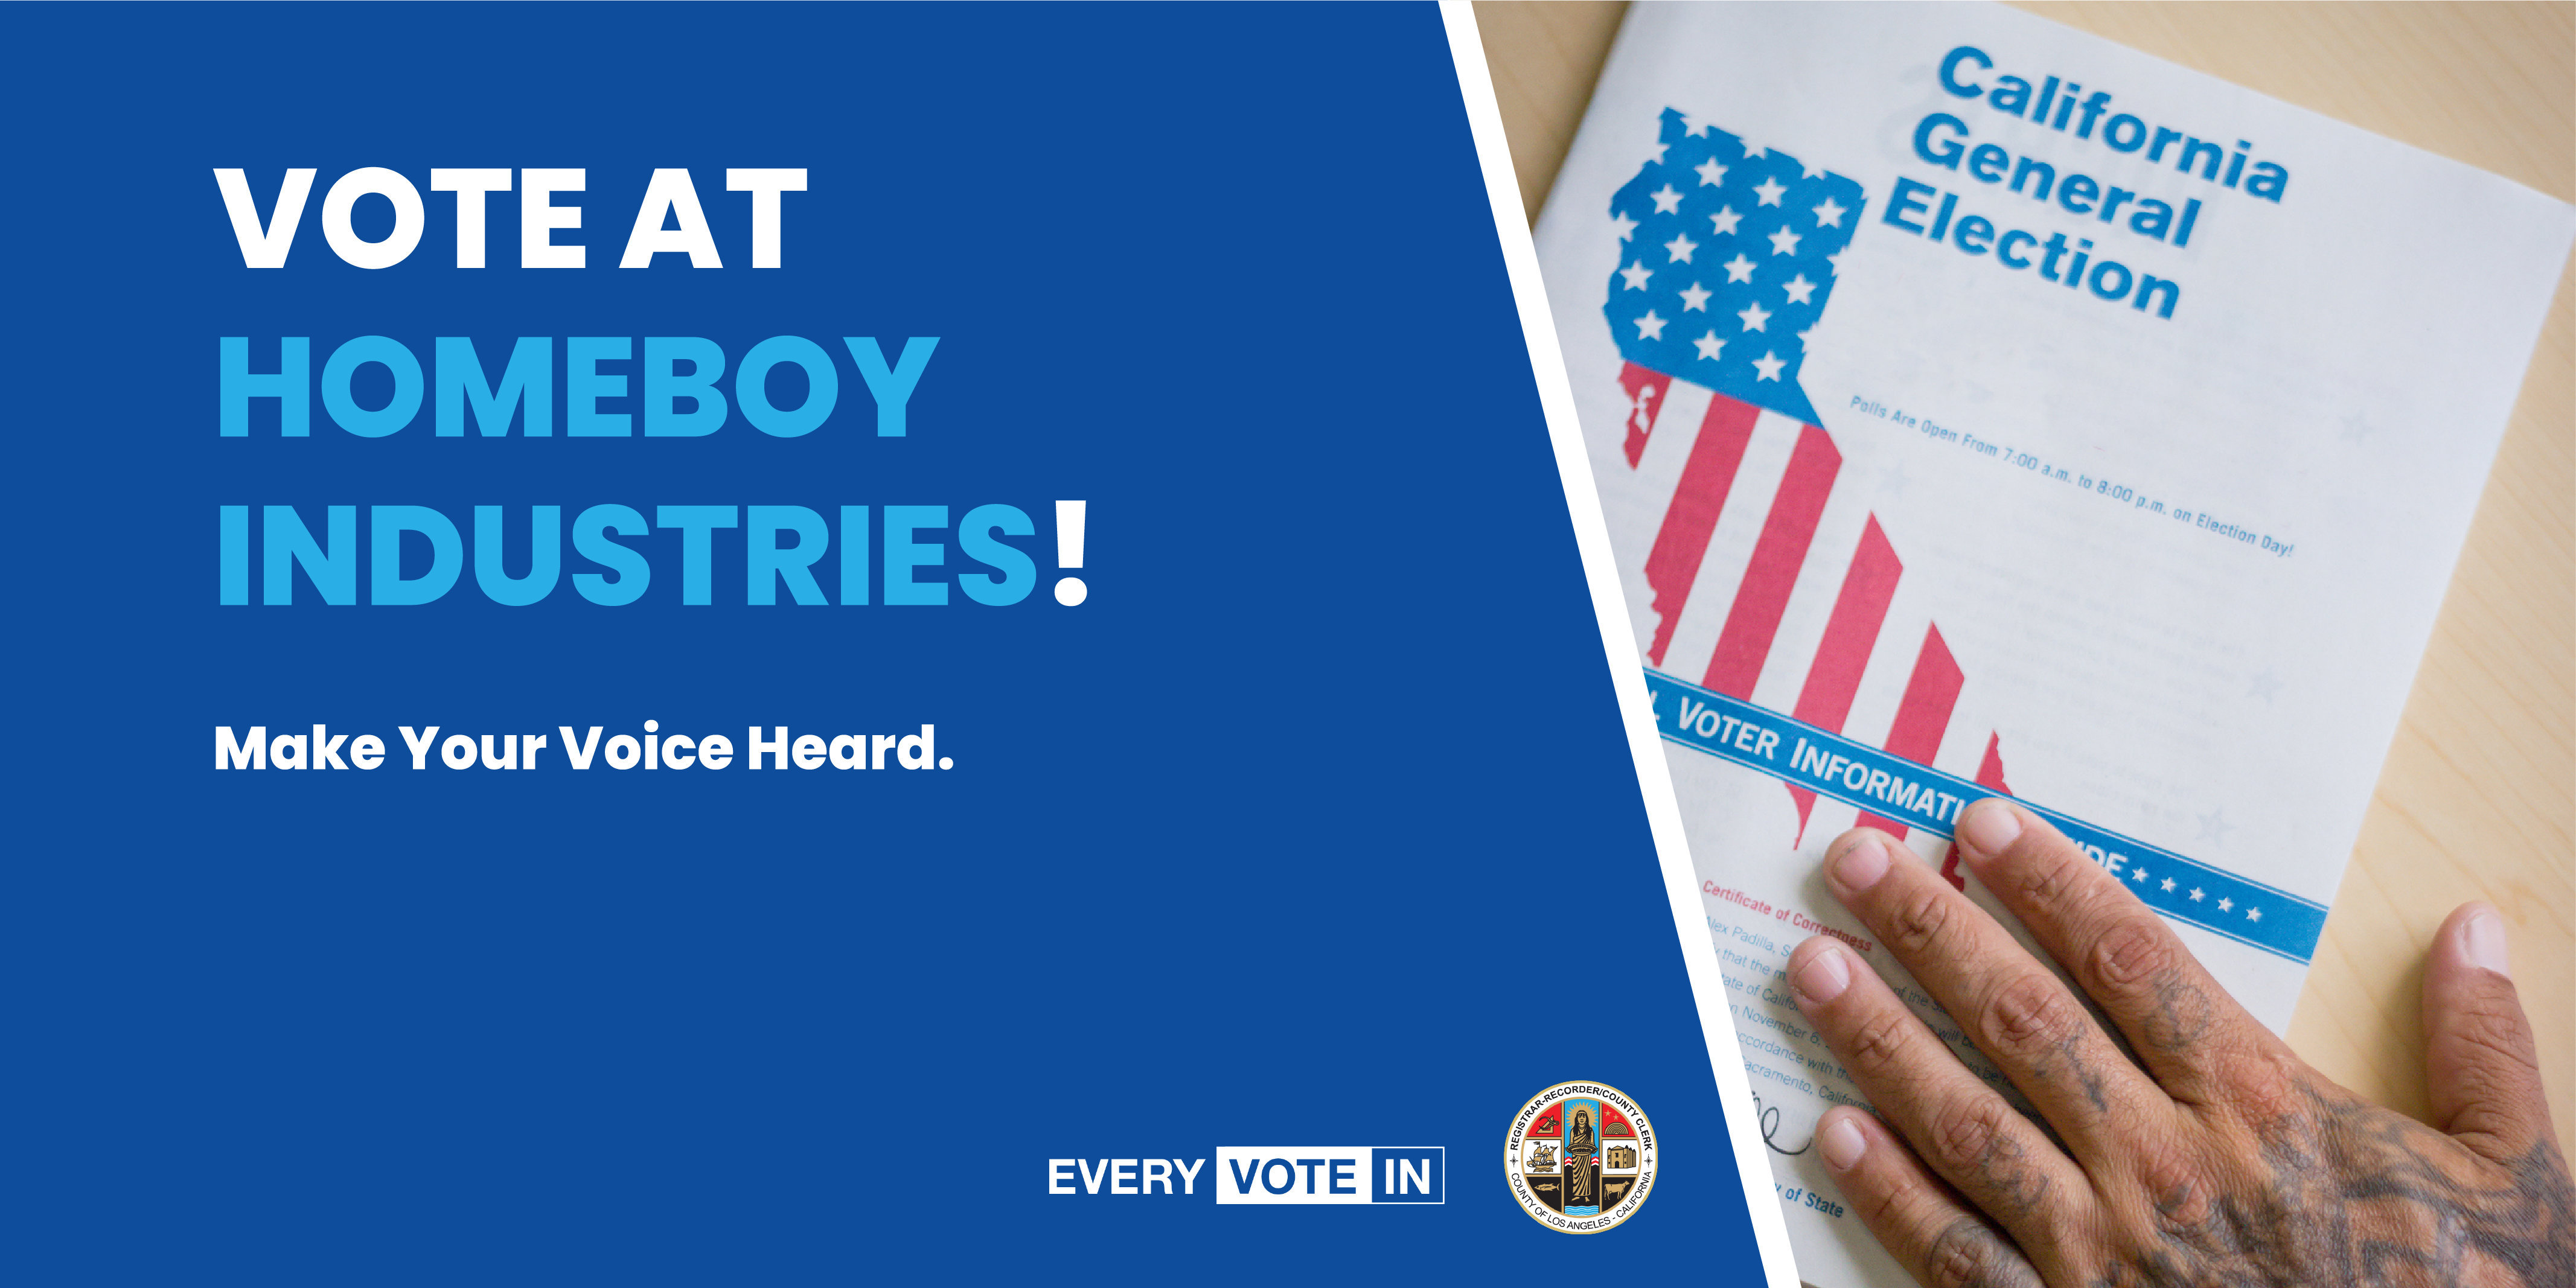 CAST YOUR VOTE AT HOMEBOY INDUSTRIES!